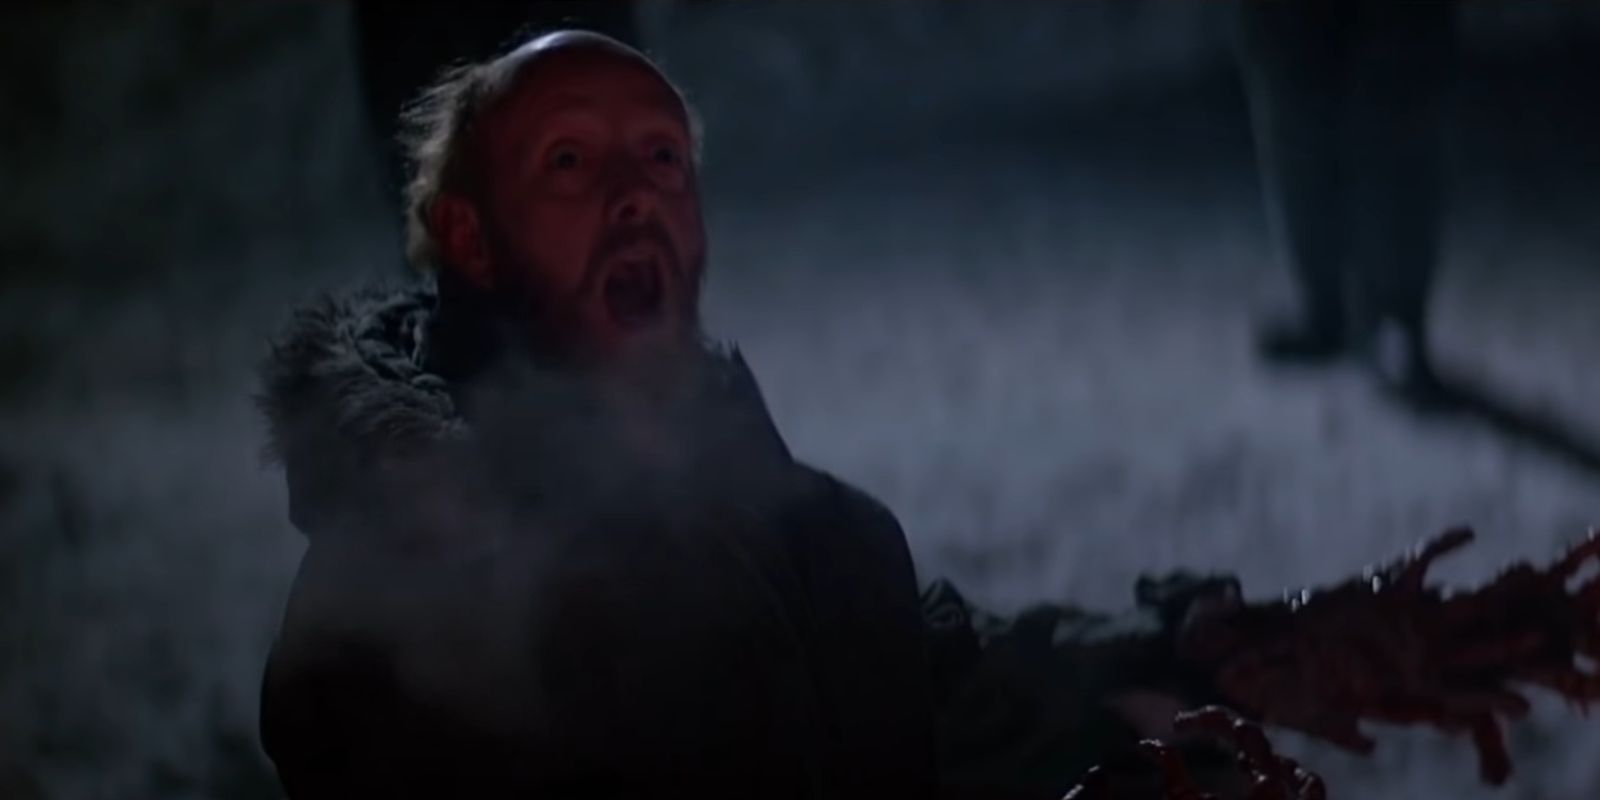 Bennings being assimilated by the Thing in John Carpenter's The Thing